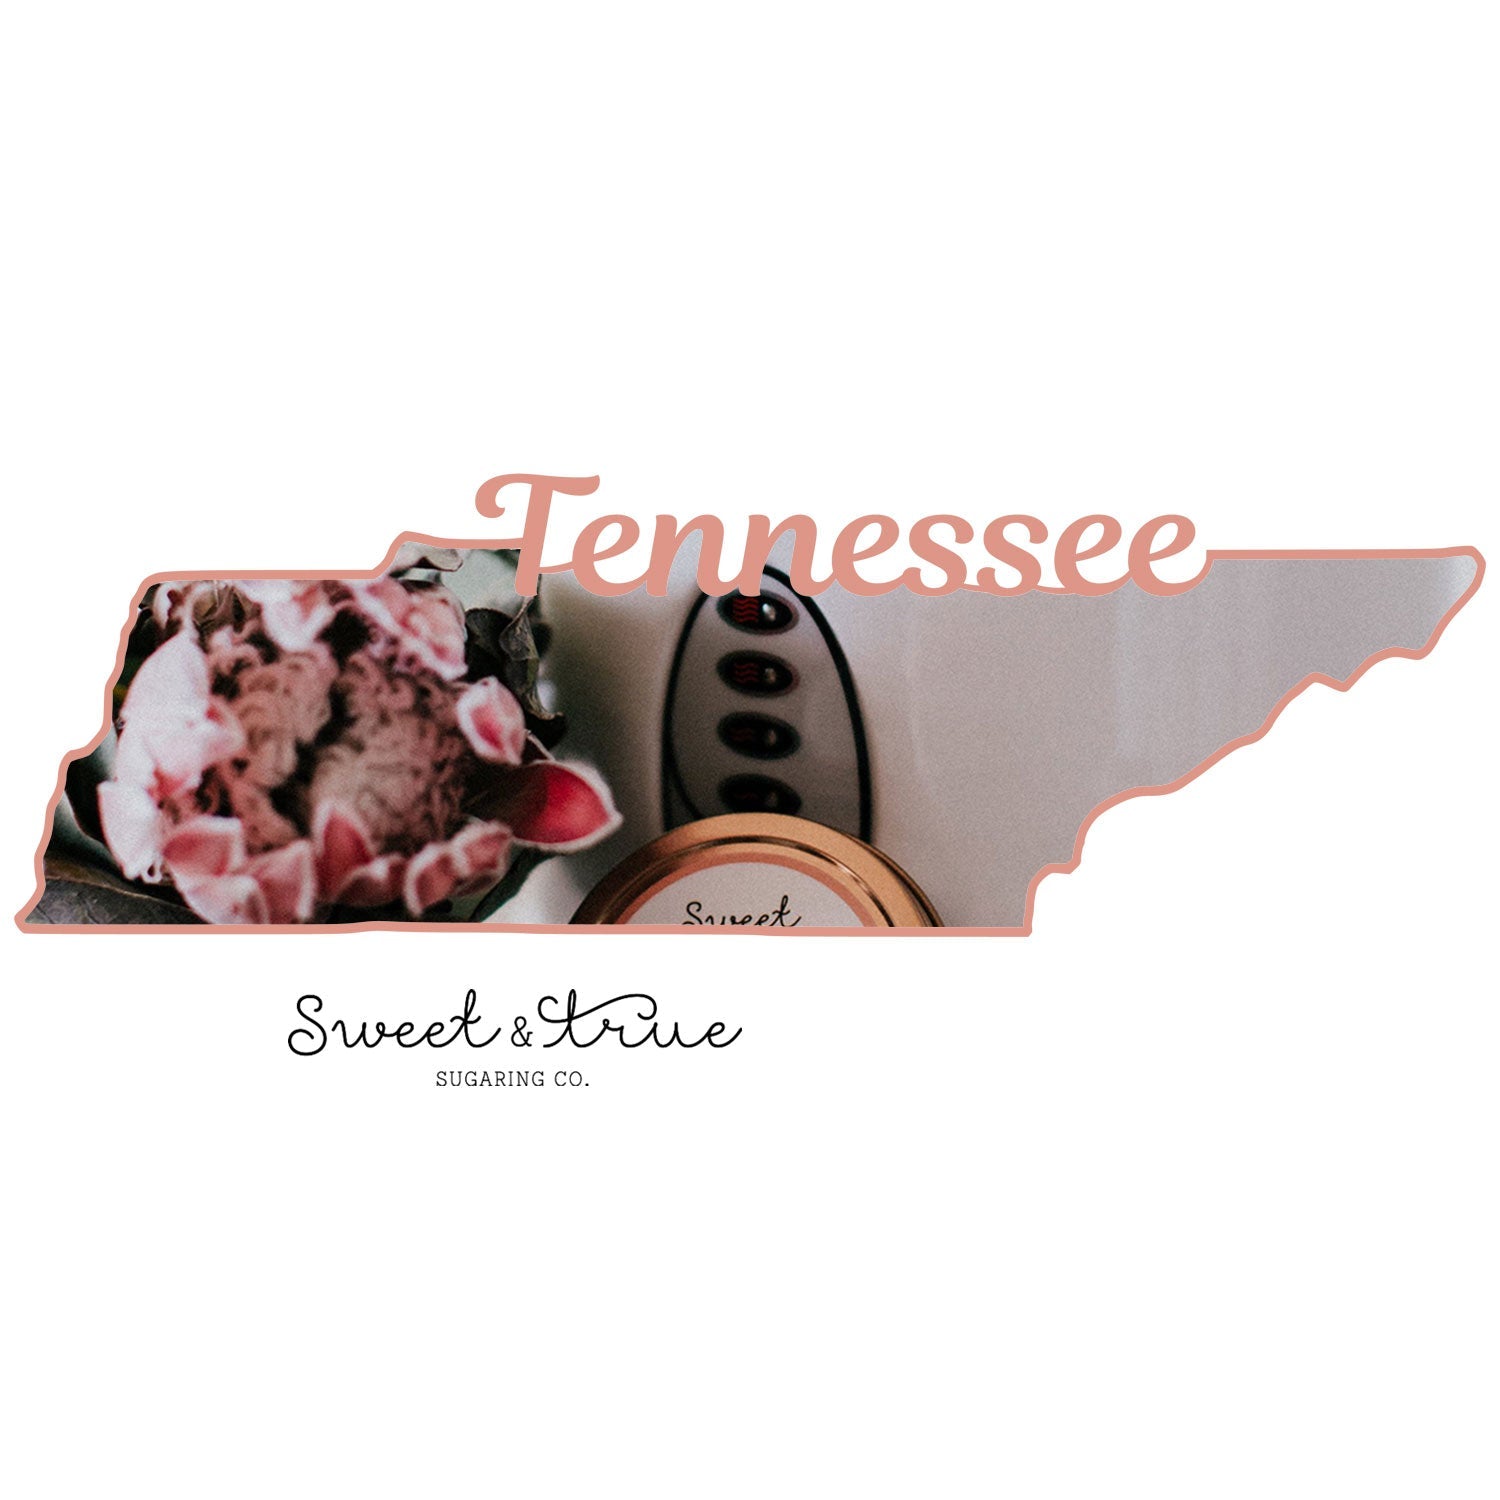 Nashville, Tennessee - Sugaring Certification